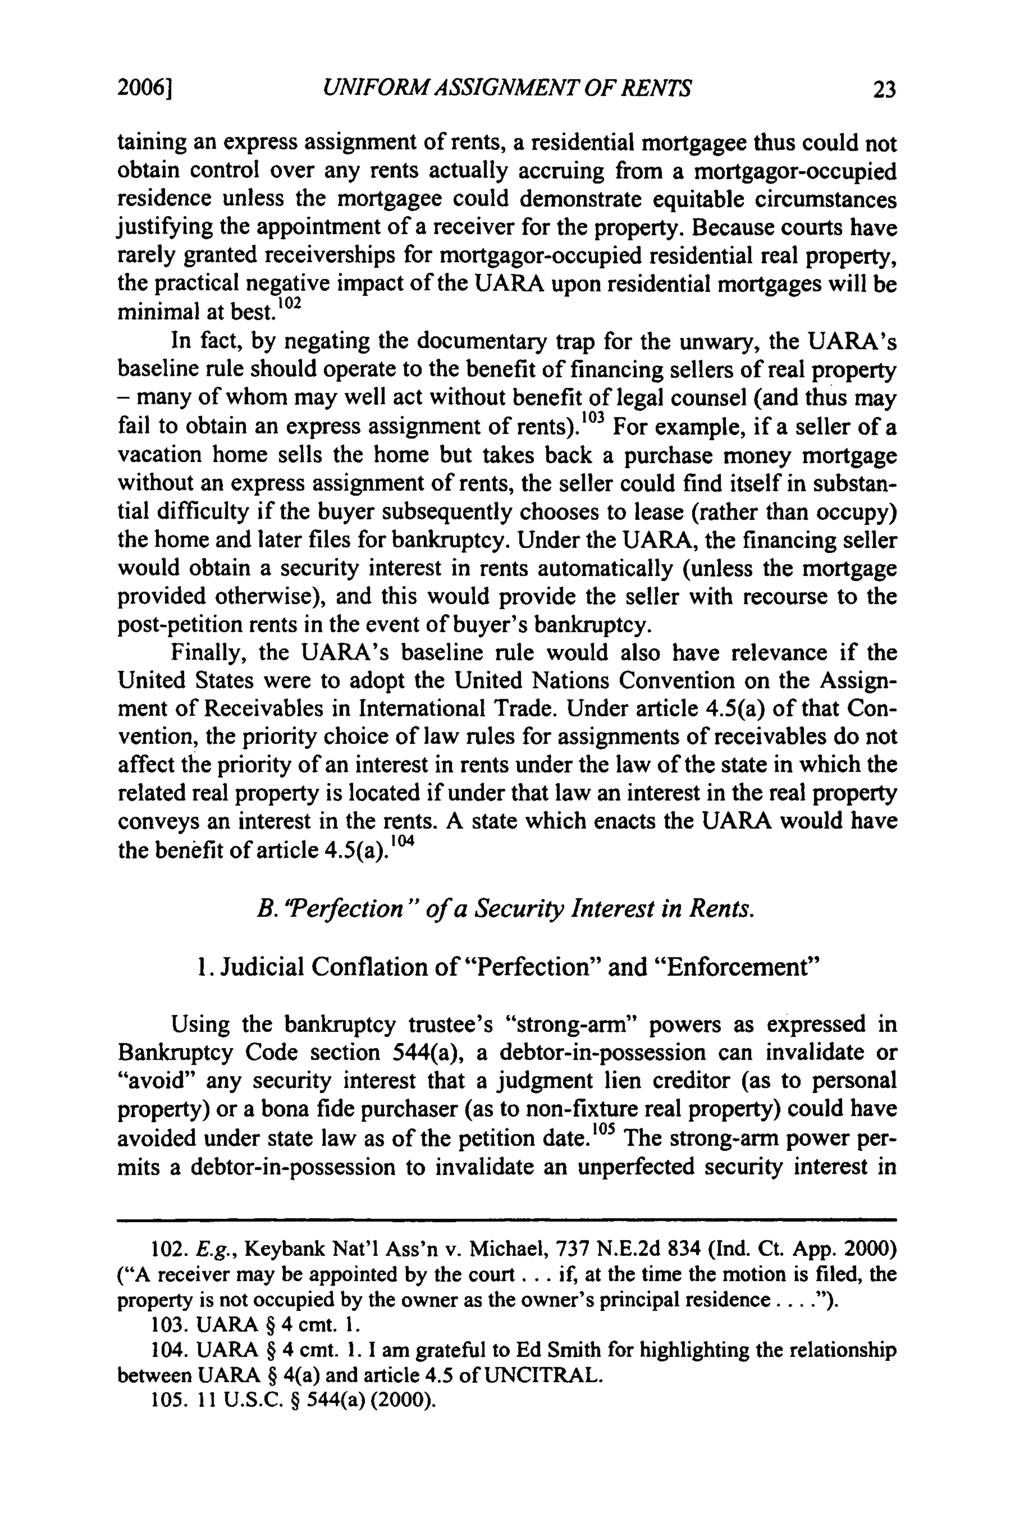 20061 Freyermuth: Freyermuth: Modernizing Security in Rents UNIFORM ASSIGNMENT OF RENTS taining an express assignment of rents, a residential mortgagee thus could not obtain control over any rents